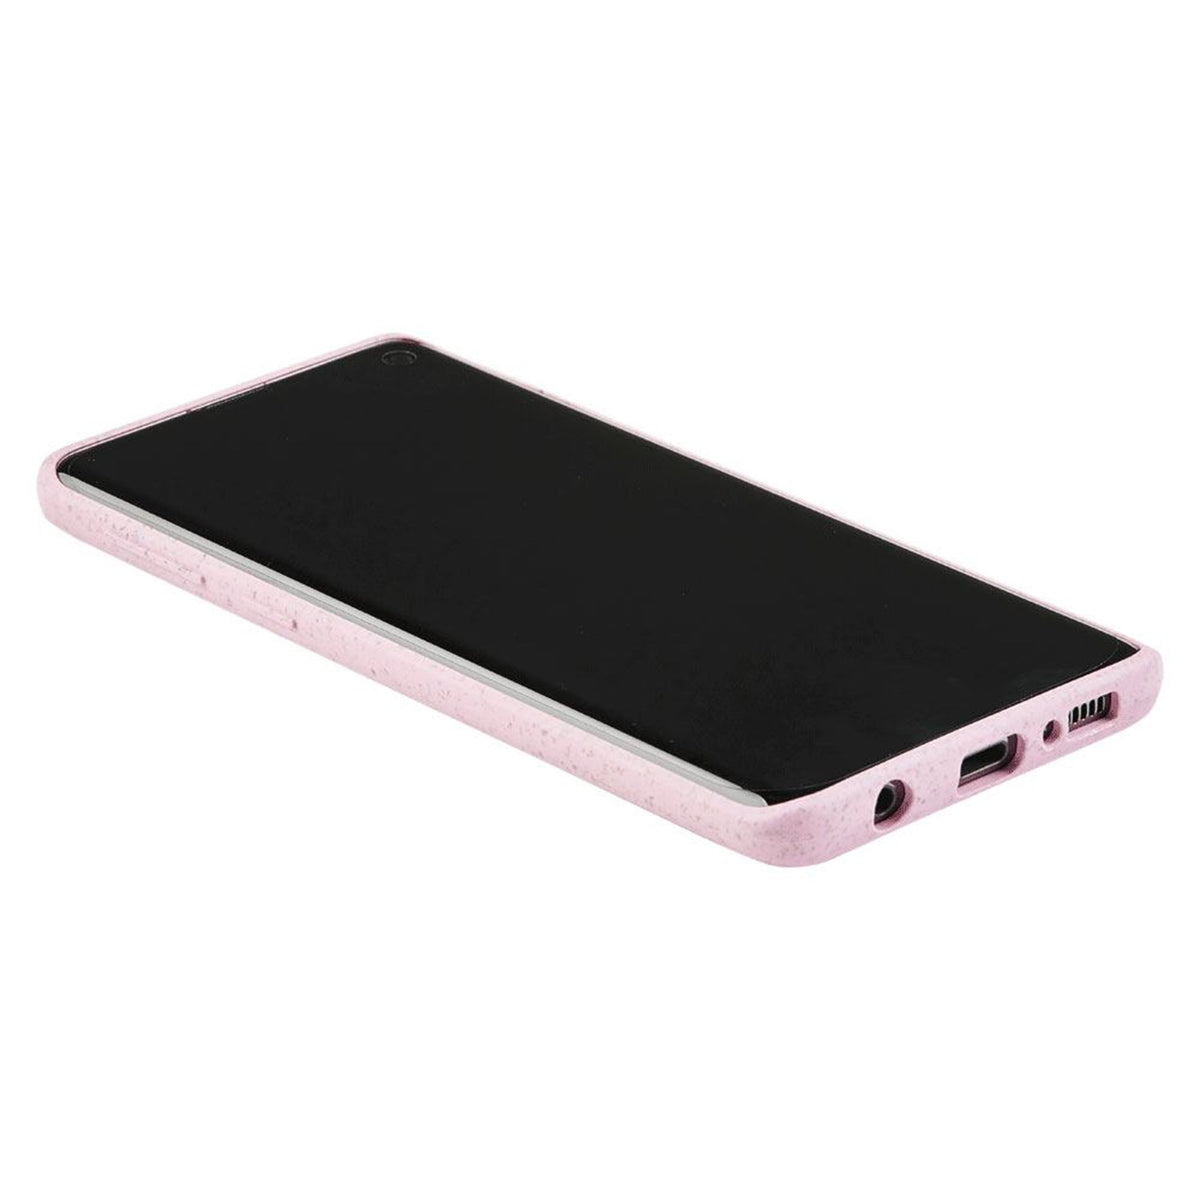 GreyLime-Samsung-Galaxy-S10-biodegradable-cover-Pink-COSAM1005-V3.jpg